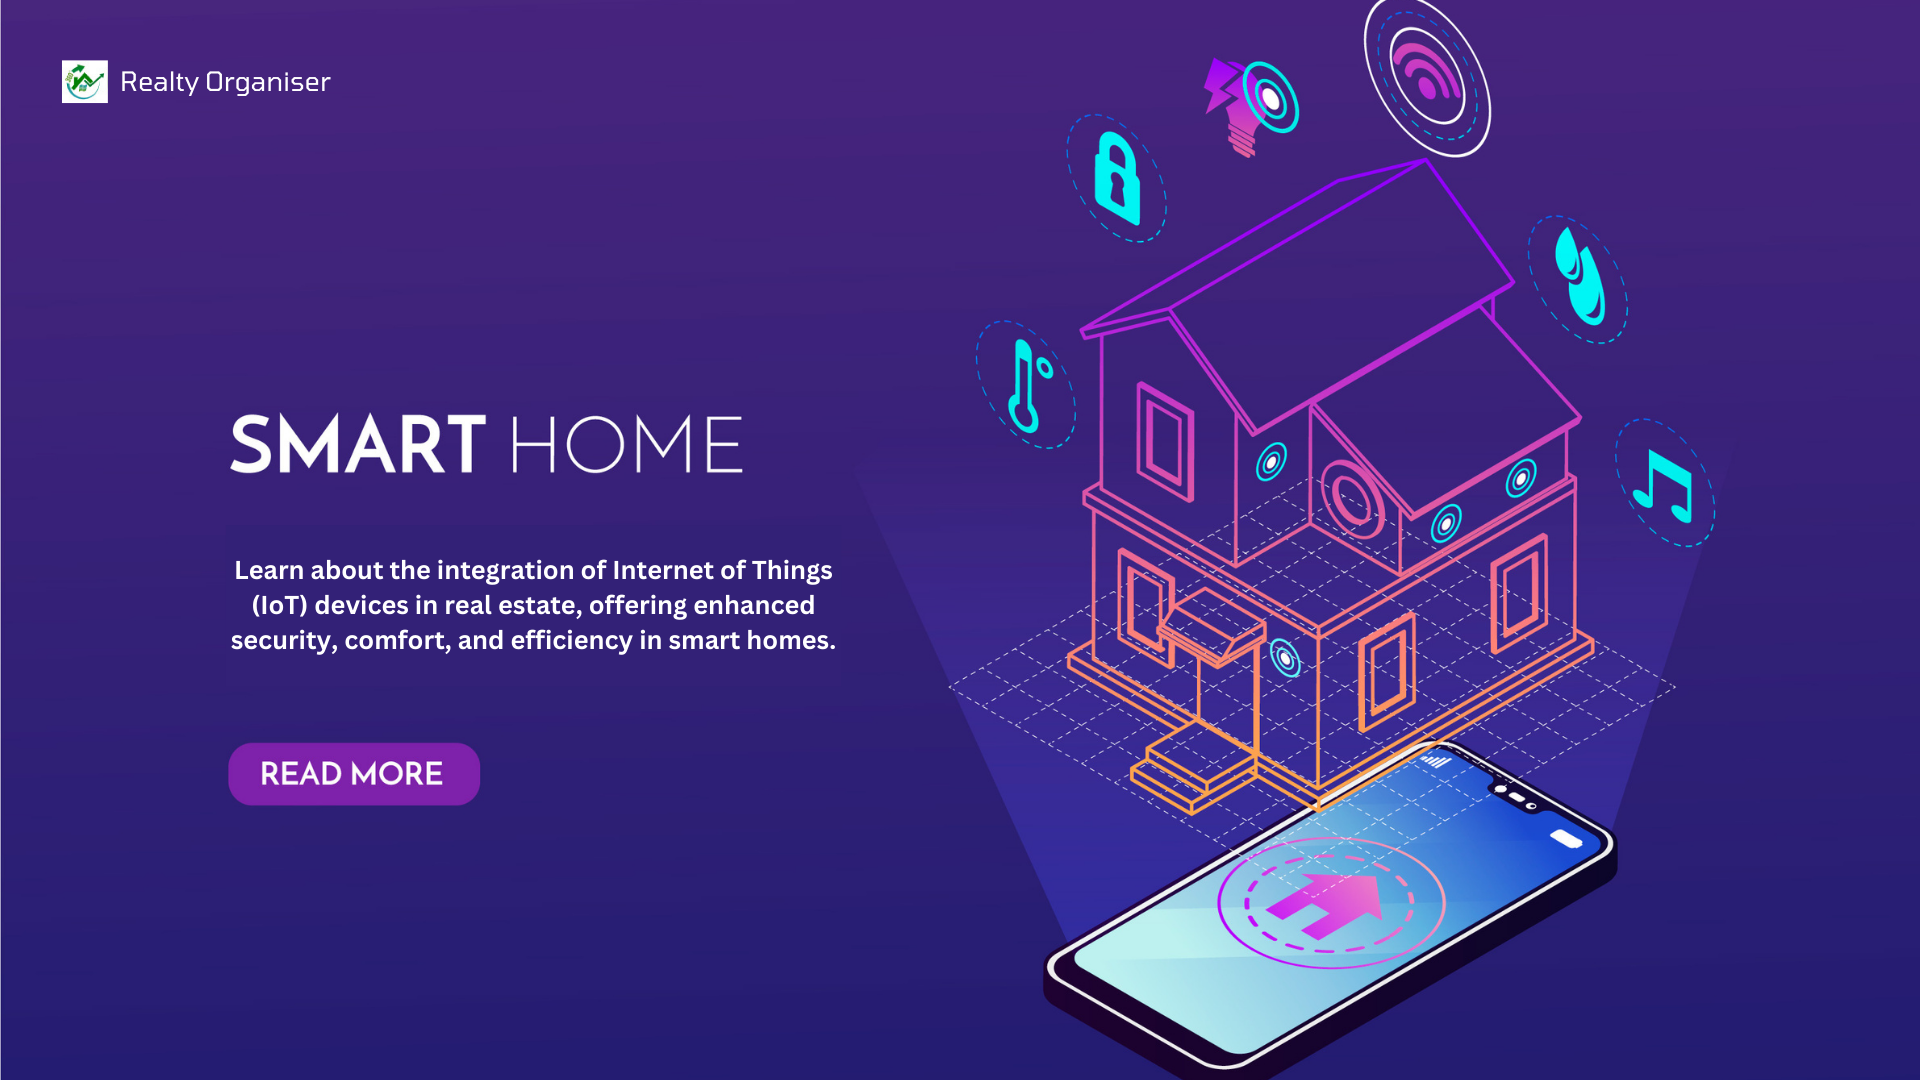 IoT, Internet of Things, smart homes, Real estate